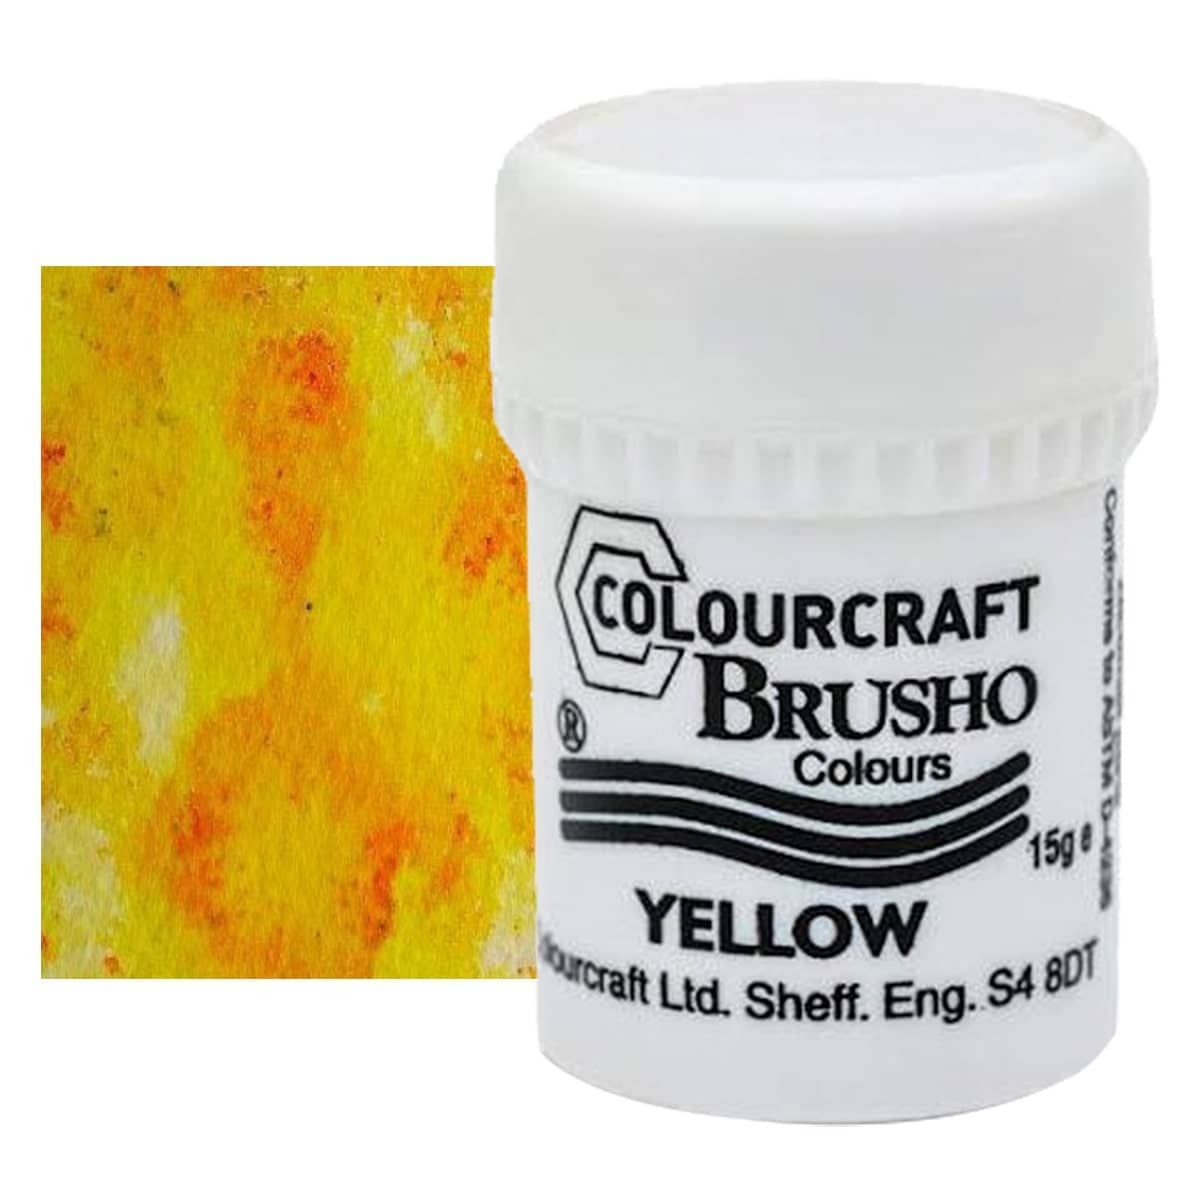 Brusho Crystal Colour, Yellow, 15 grams